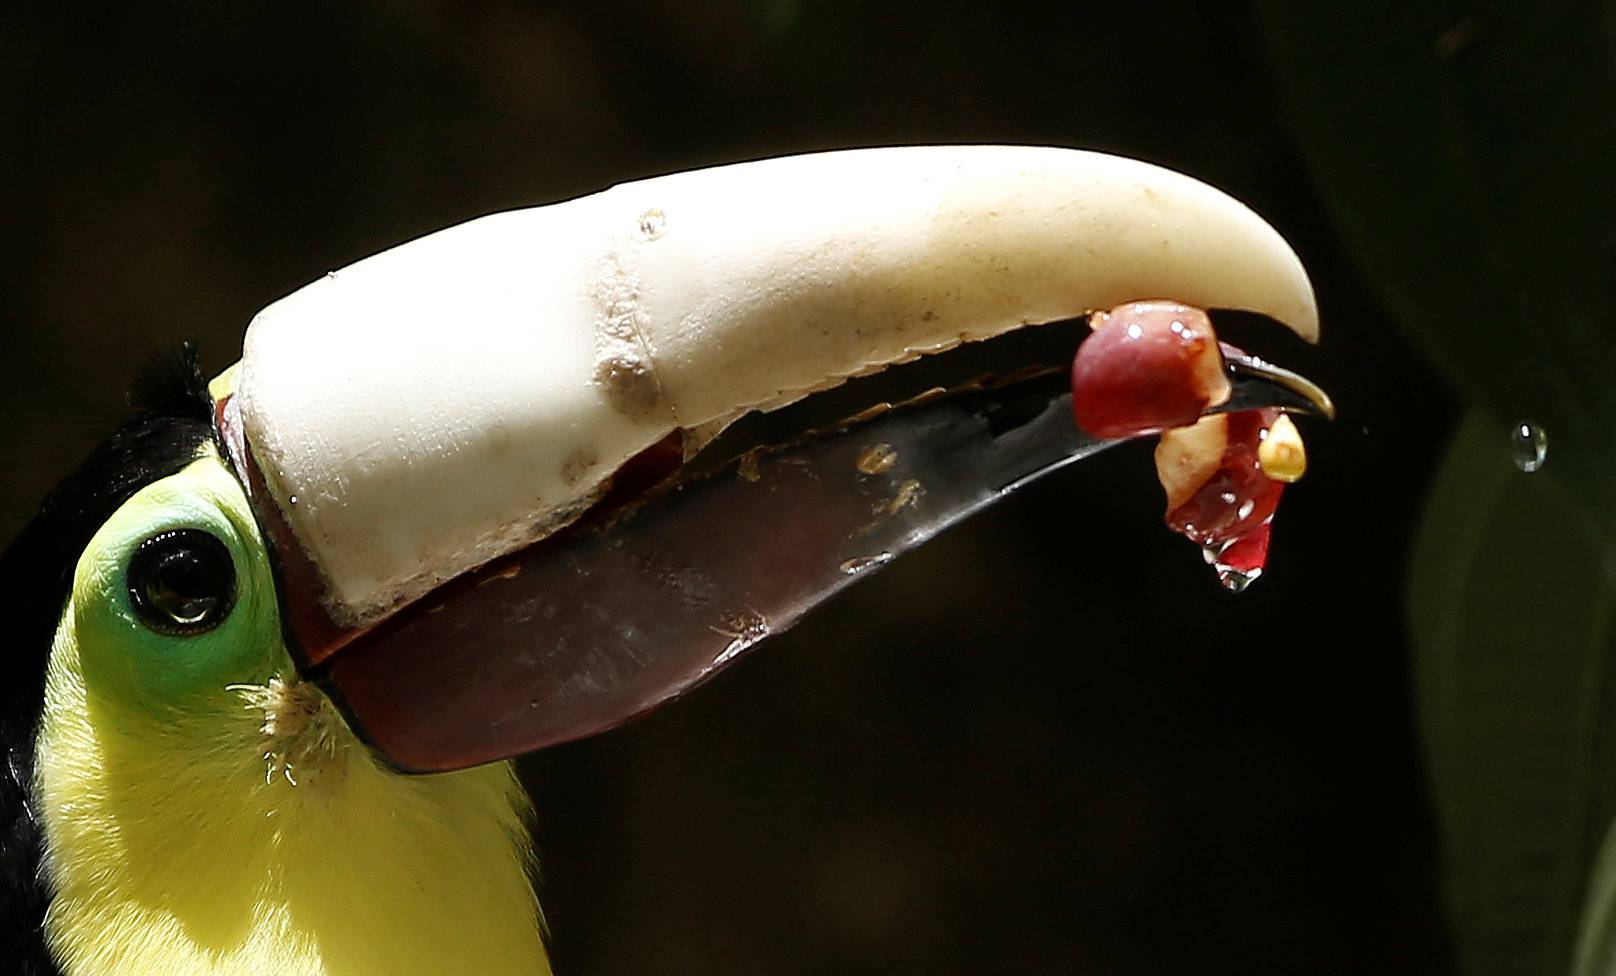 Grecia the toucan, which lost most of his upper beak in an attack, eat with his new 3D-printed beak at Zoo Ave animal sanctuary in Alajuela, Costa Rica